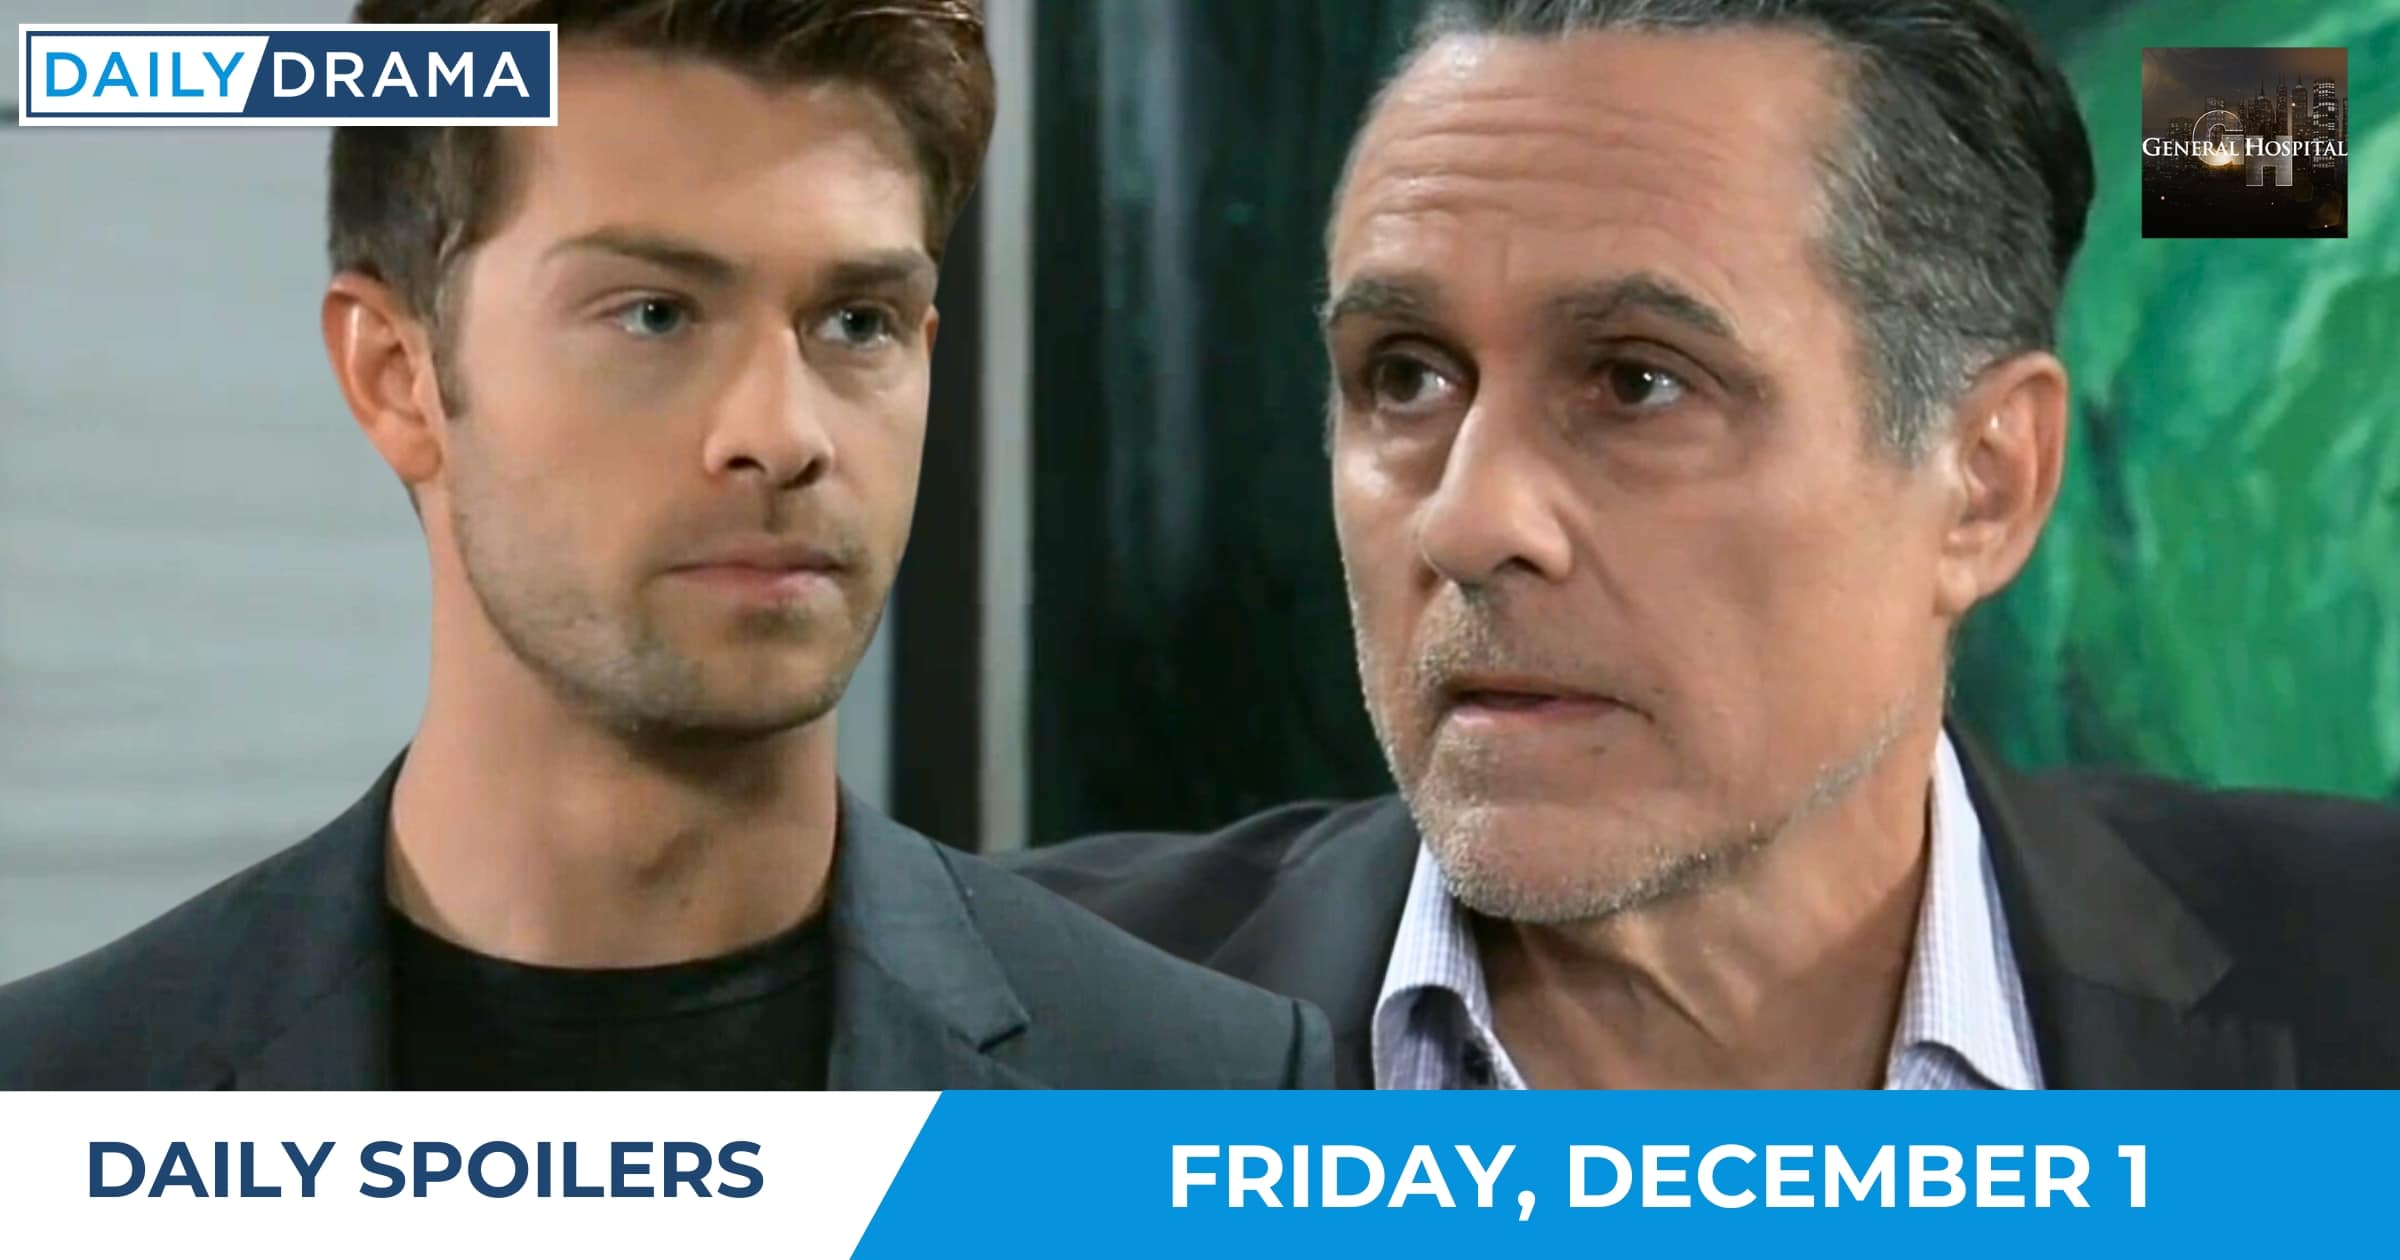 General Hospital Daily Spoilers - Dec 1 - Dex and Sonny